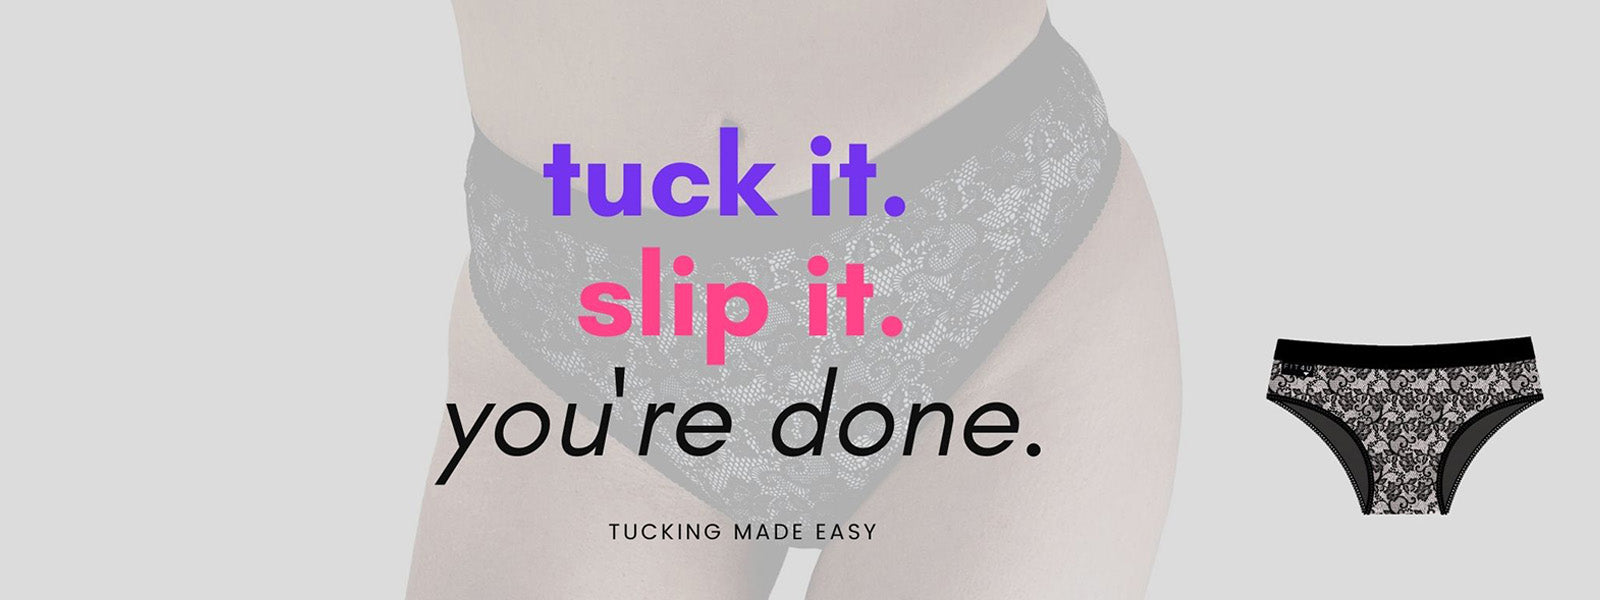 Tucking, made easy. Tuck it